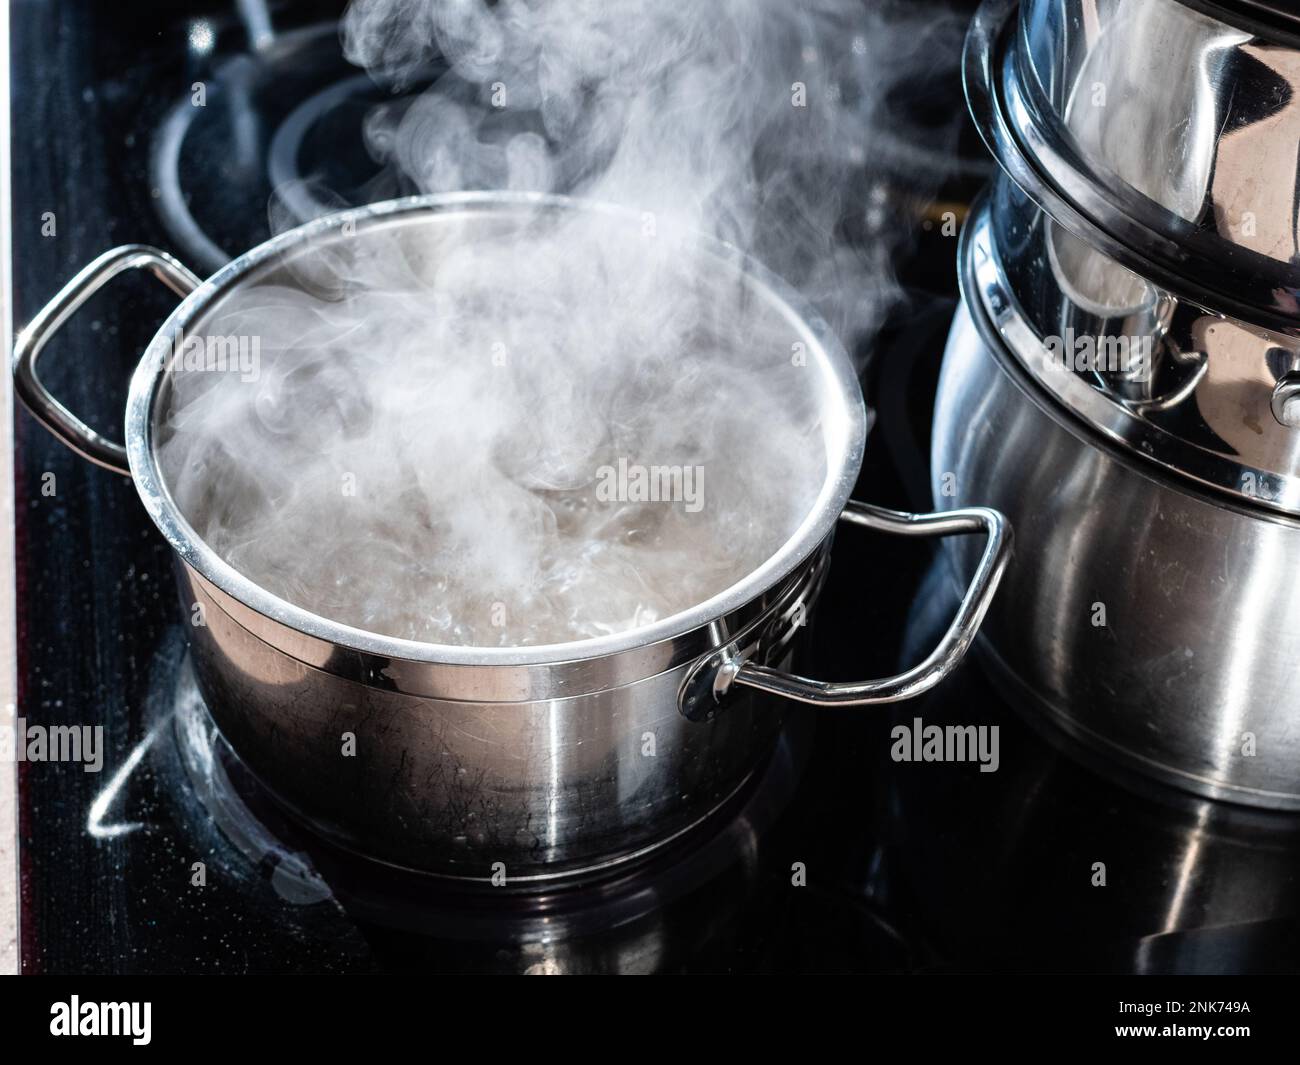 https://c8.alamy.com/comp/2NK749A/steel-pot-of-boiling-water-on-ceramic-stove-in-home-kitchen-2NK749A.jpg